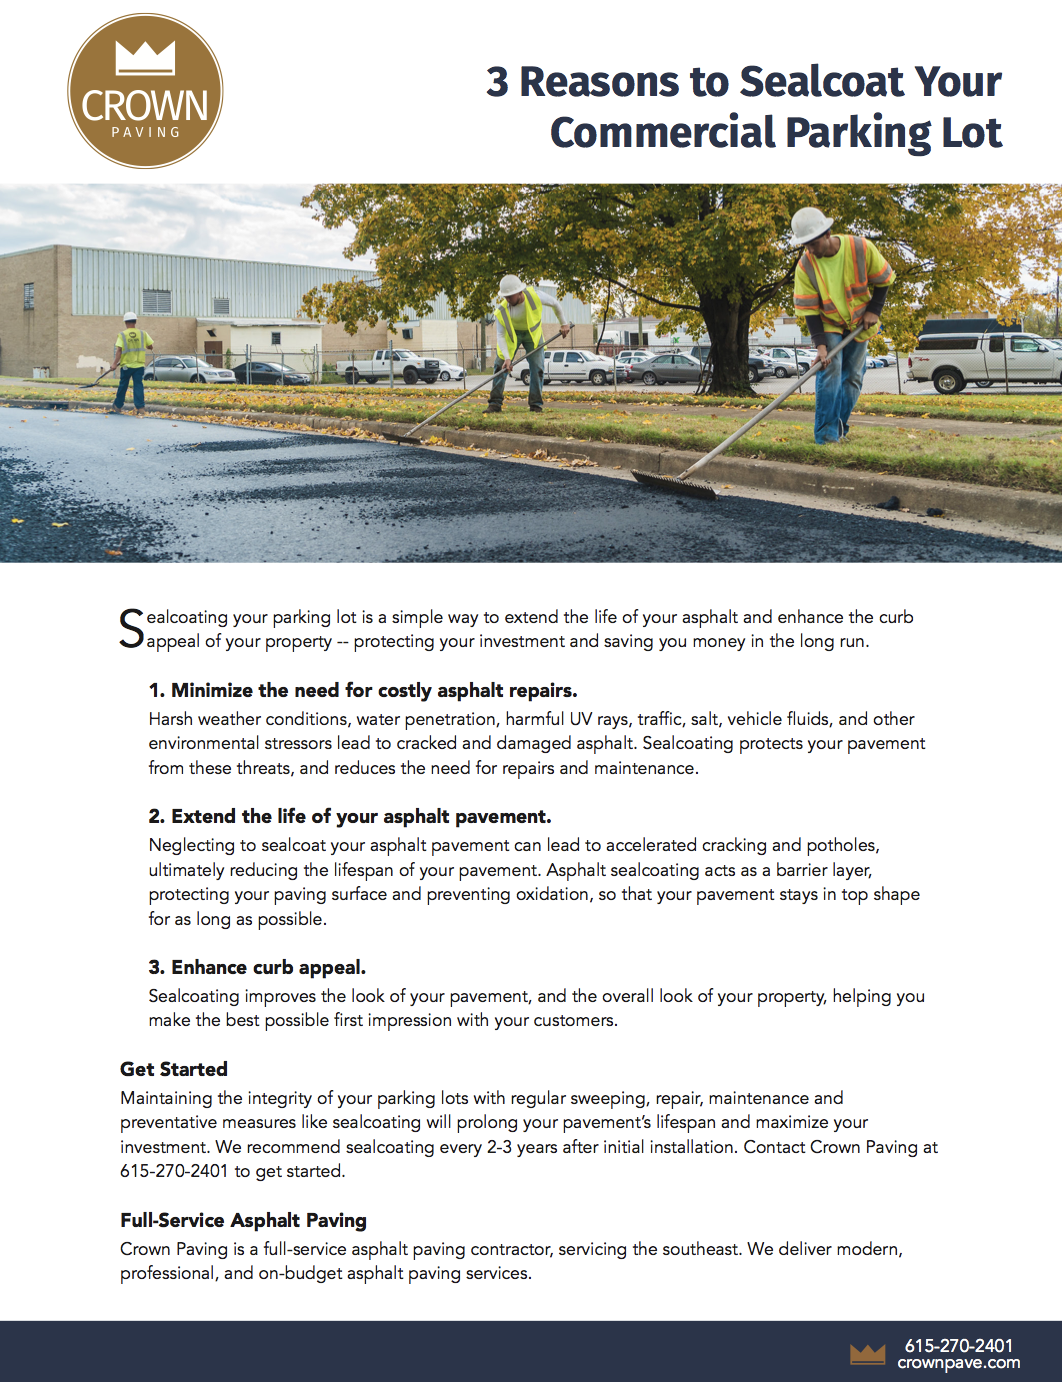 3 Reasons to Sealcoat Your Commercial Parking Lot PDF